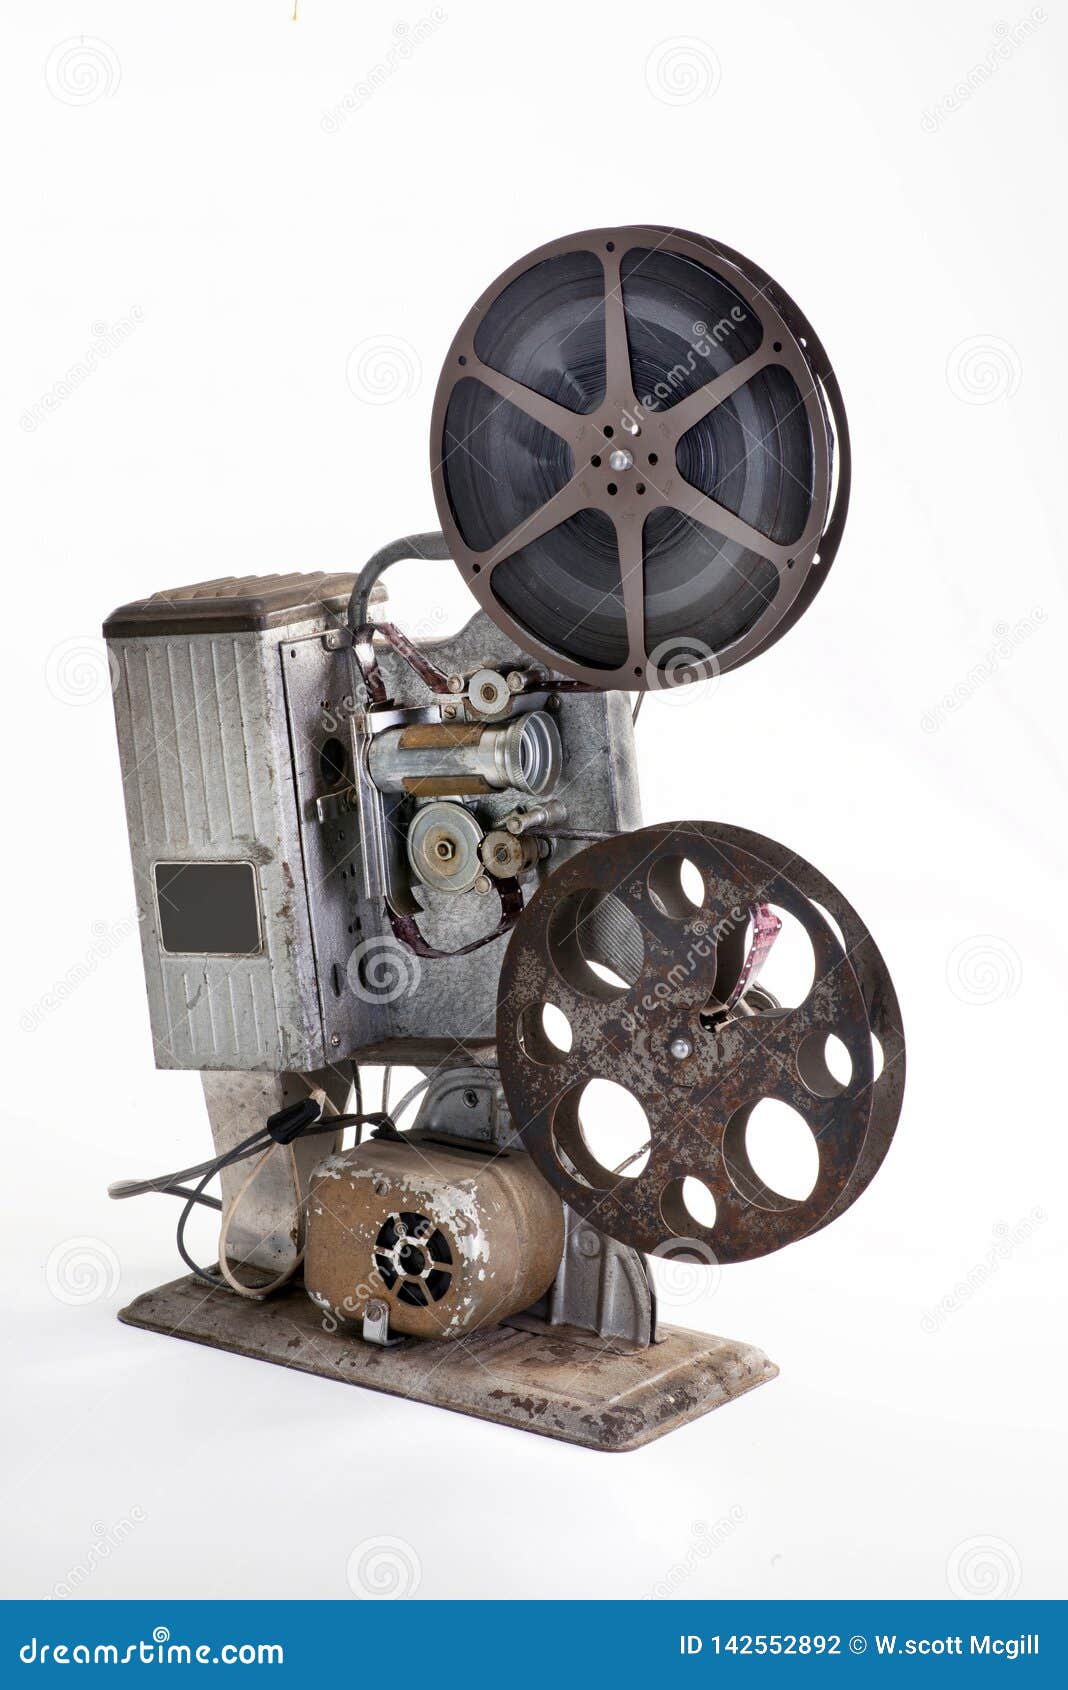 16mm Film Projector stock photo. Image of cinematography - 142552892